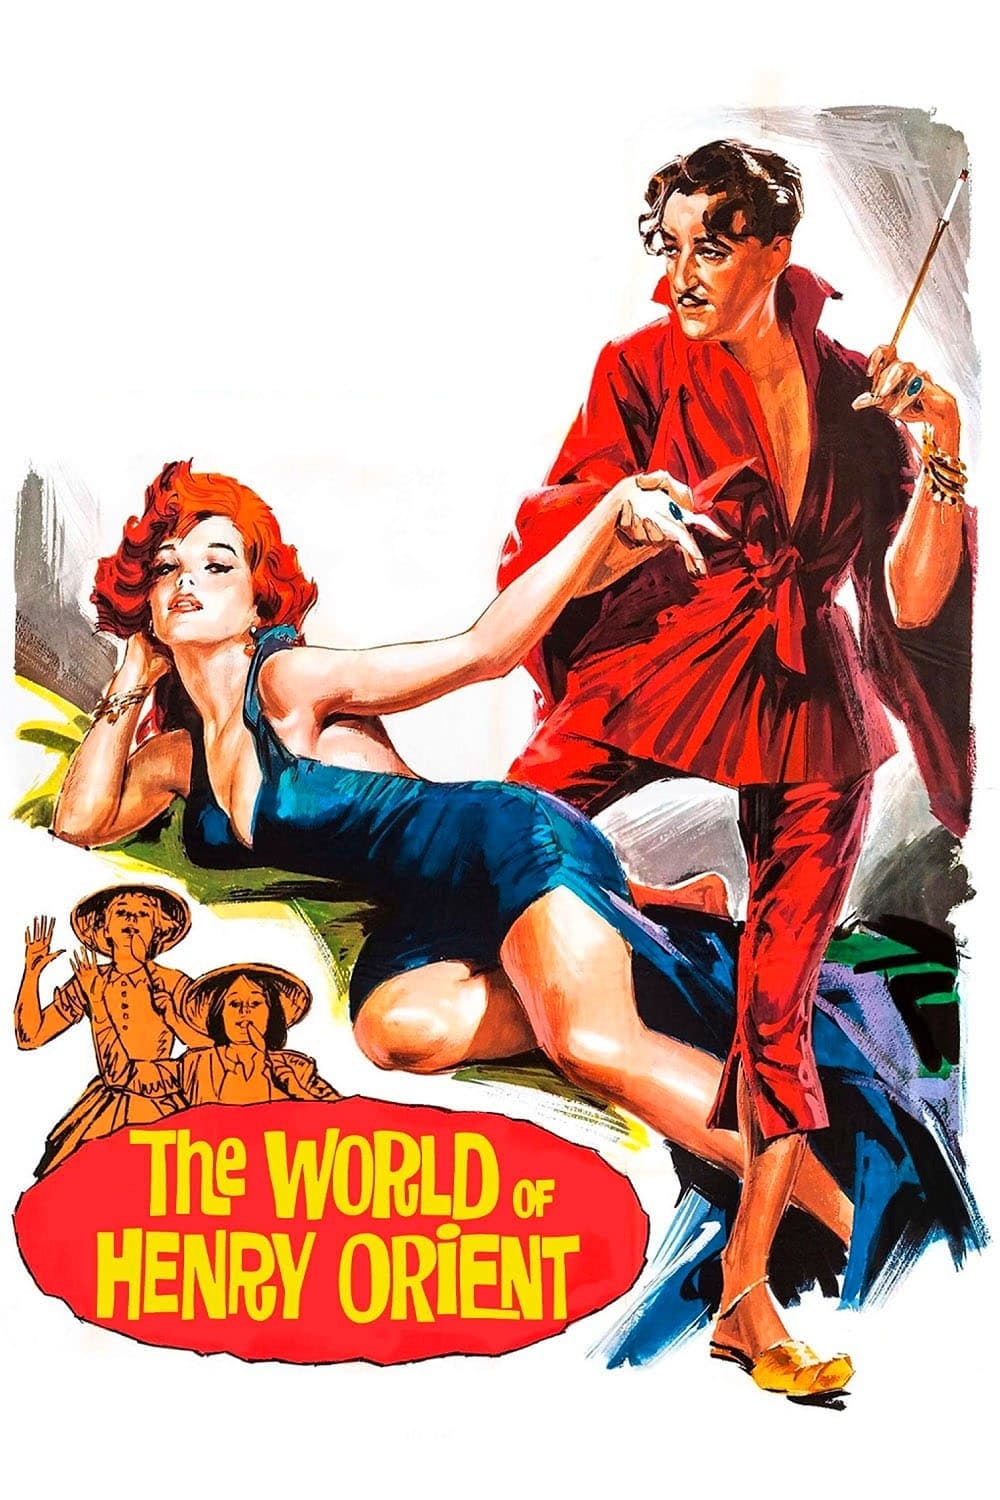 The World of Henry Orient (1964) | Poster